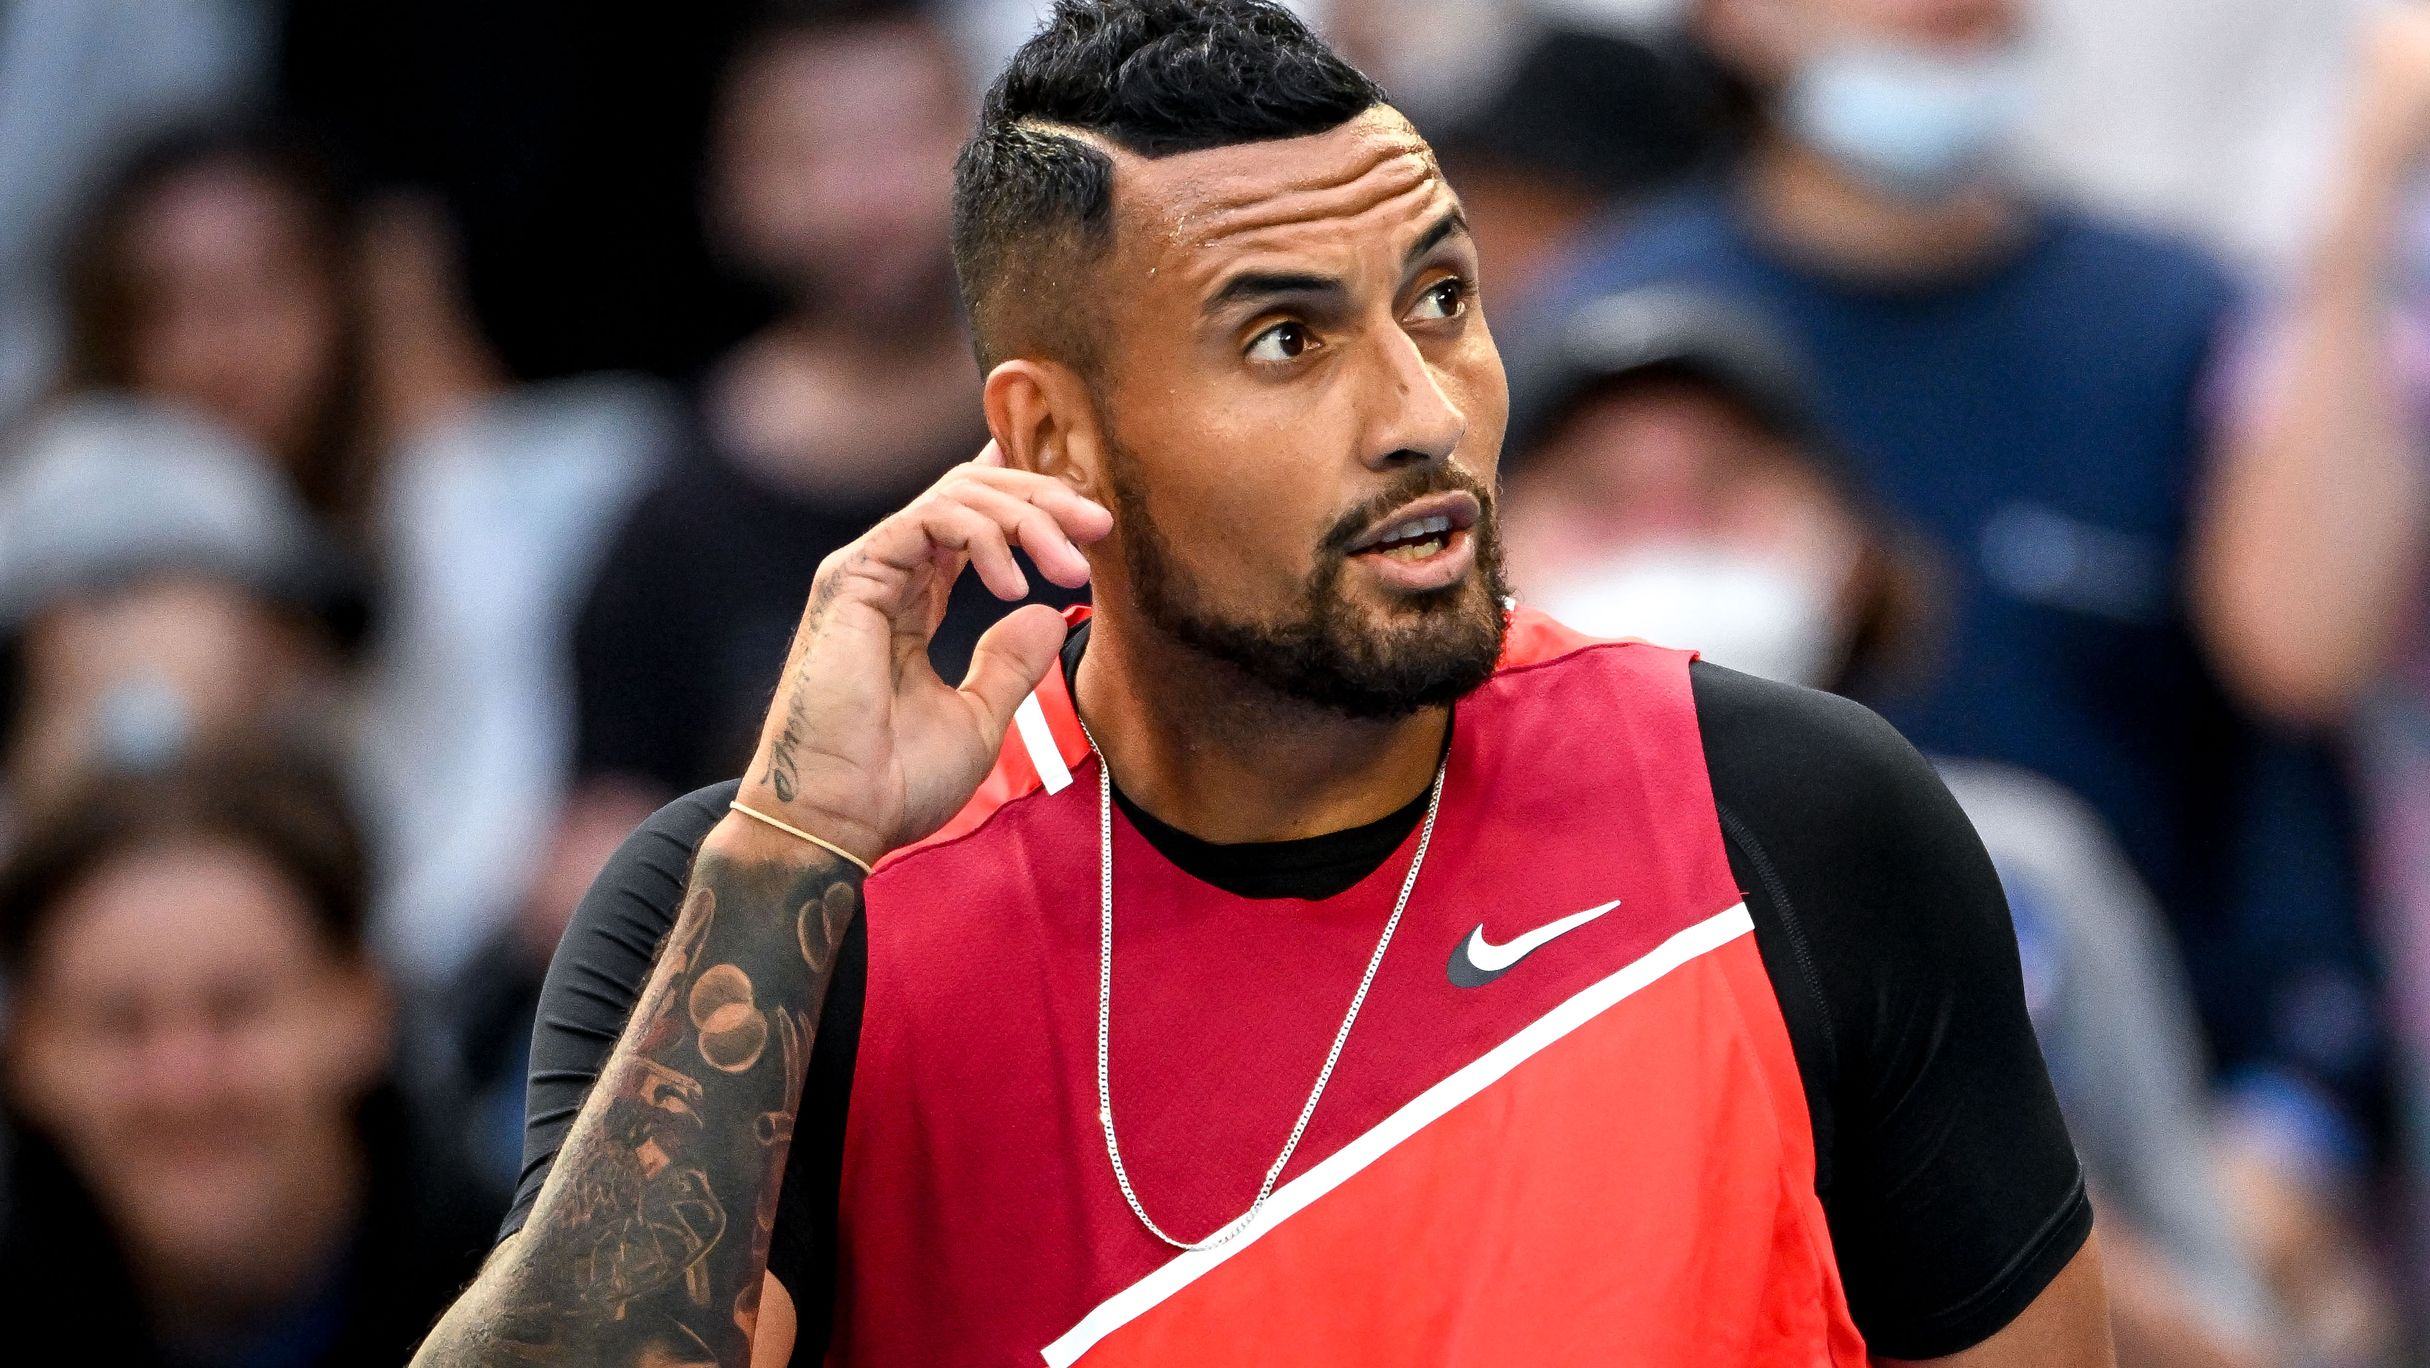 Kyrgios opponent cops 'absolutely awful' sledges